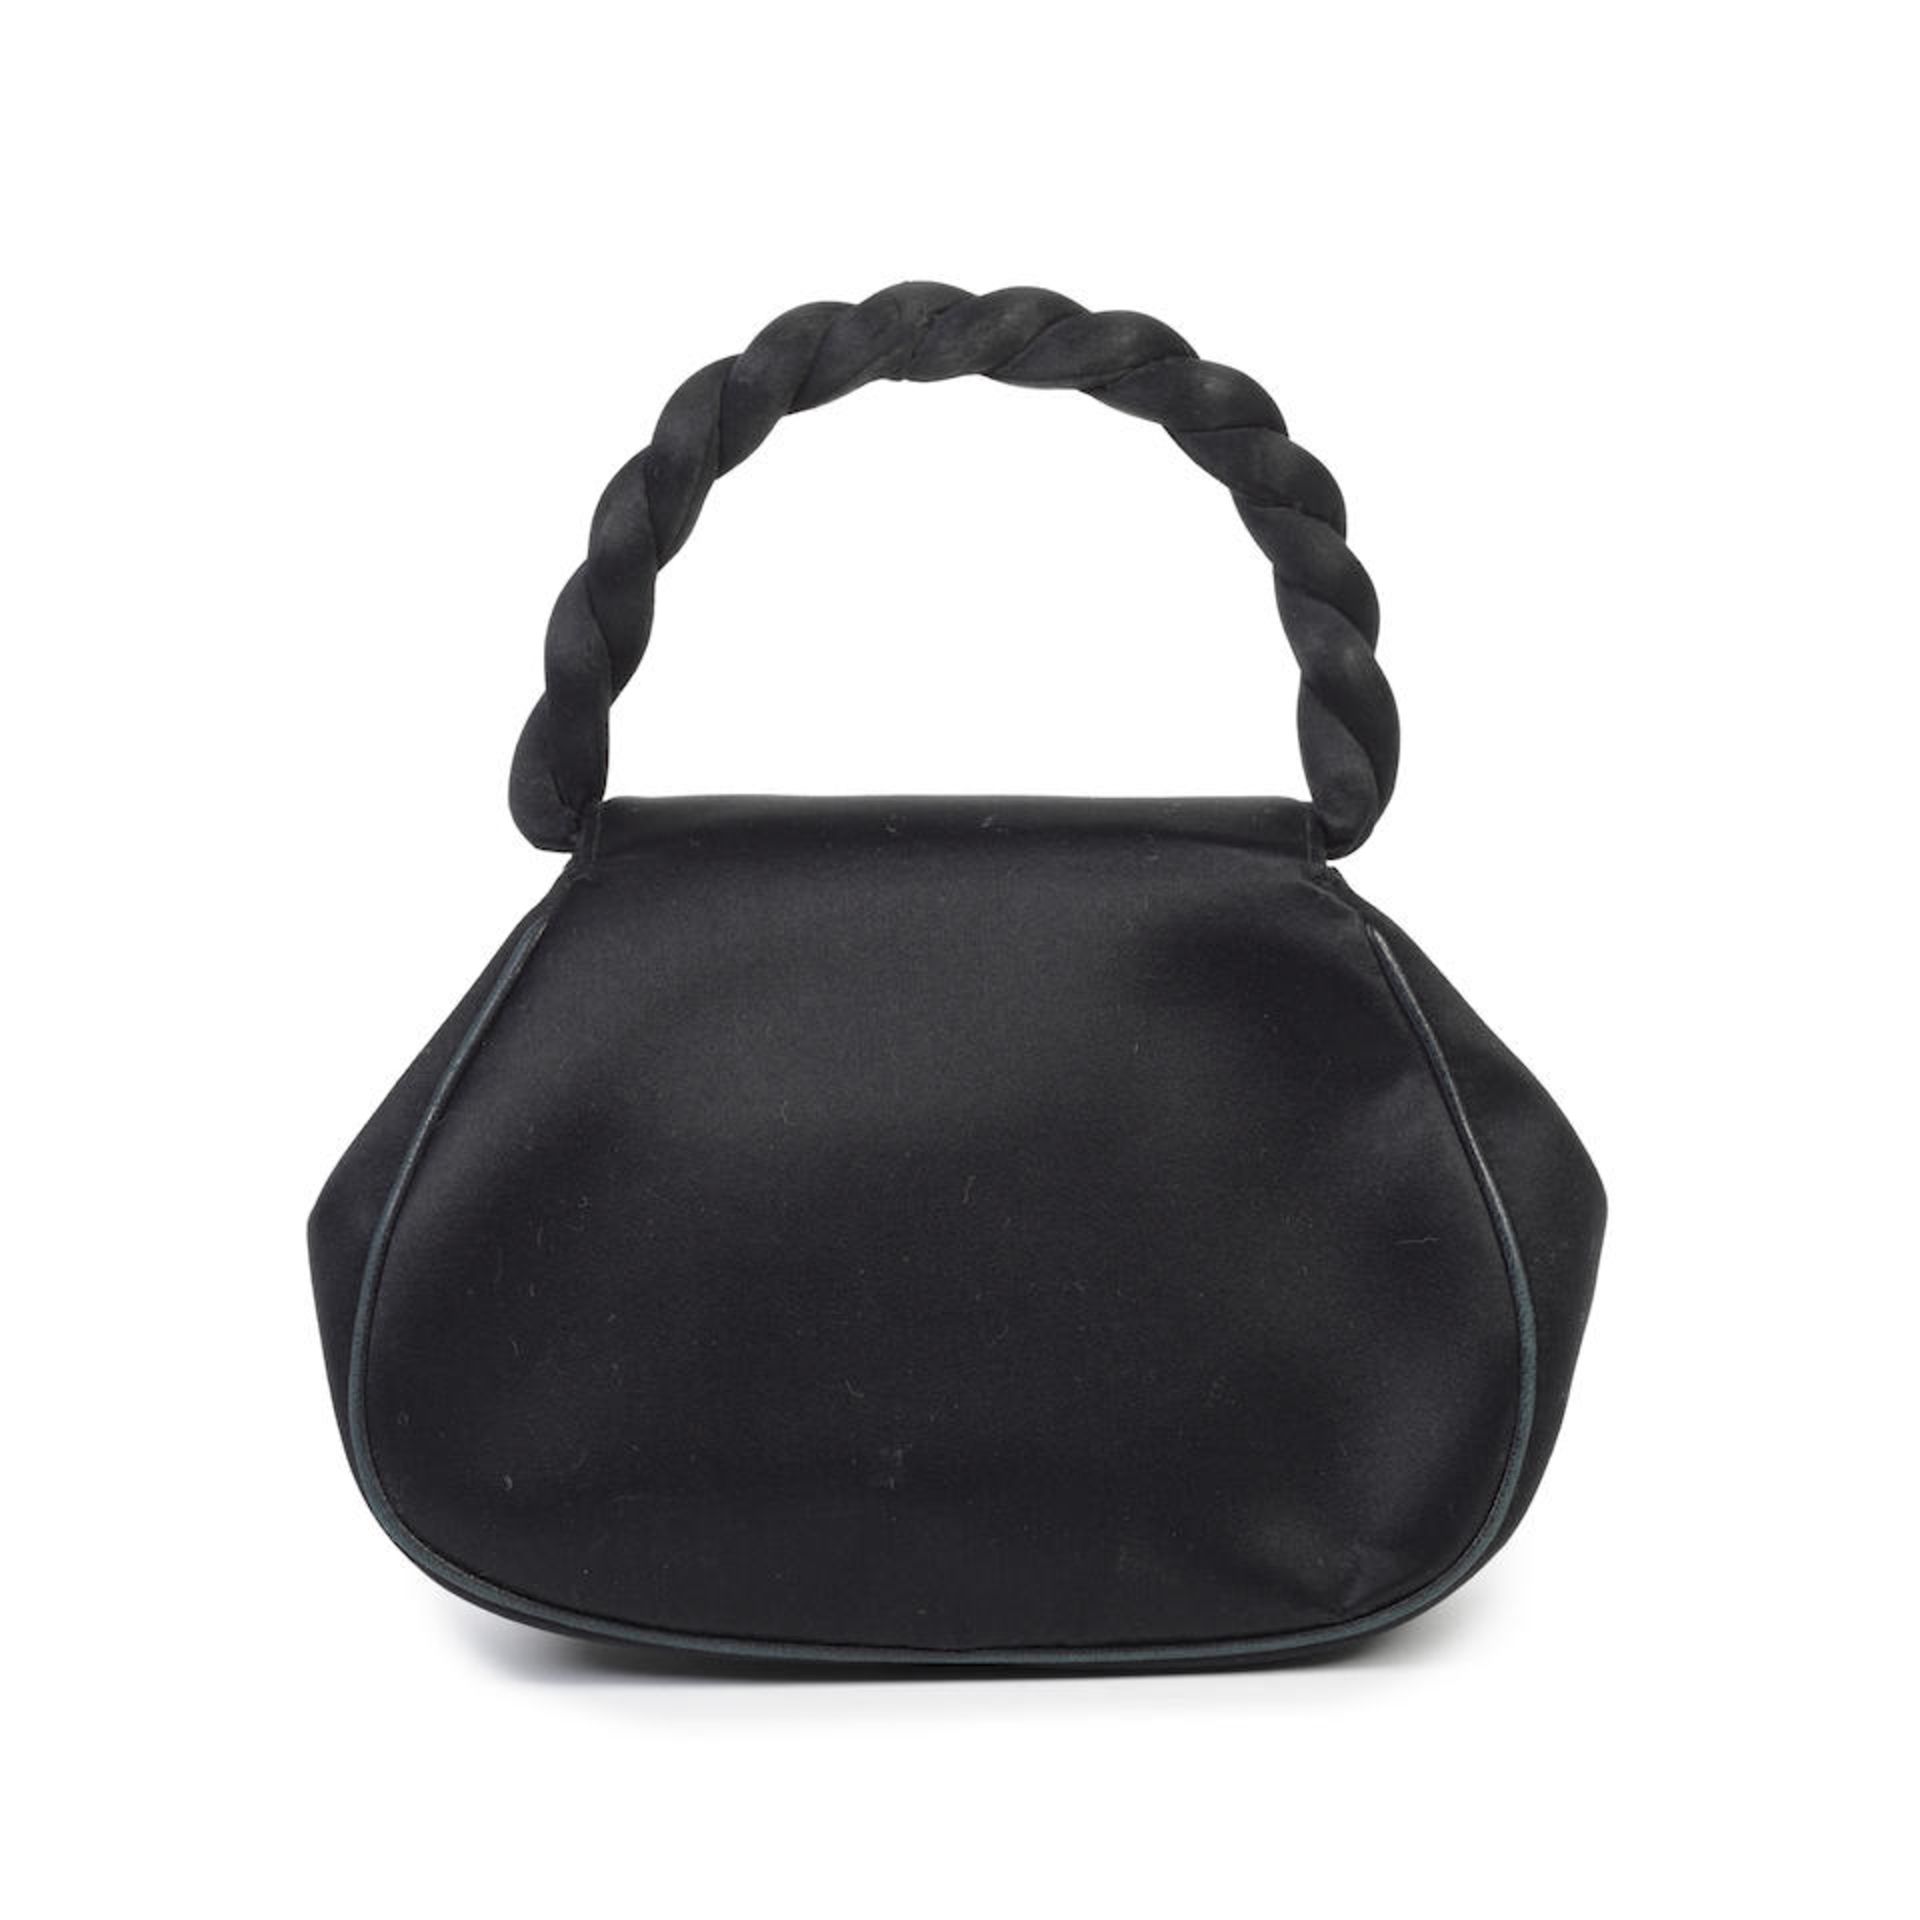 Karl Lagerfeld for Chanel: a Black Satin CC Top Handle Bag 1996-97 (includes serial sticker, aut... - Image 2 of 2